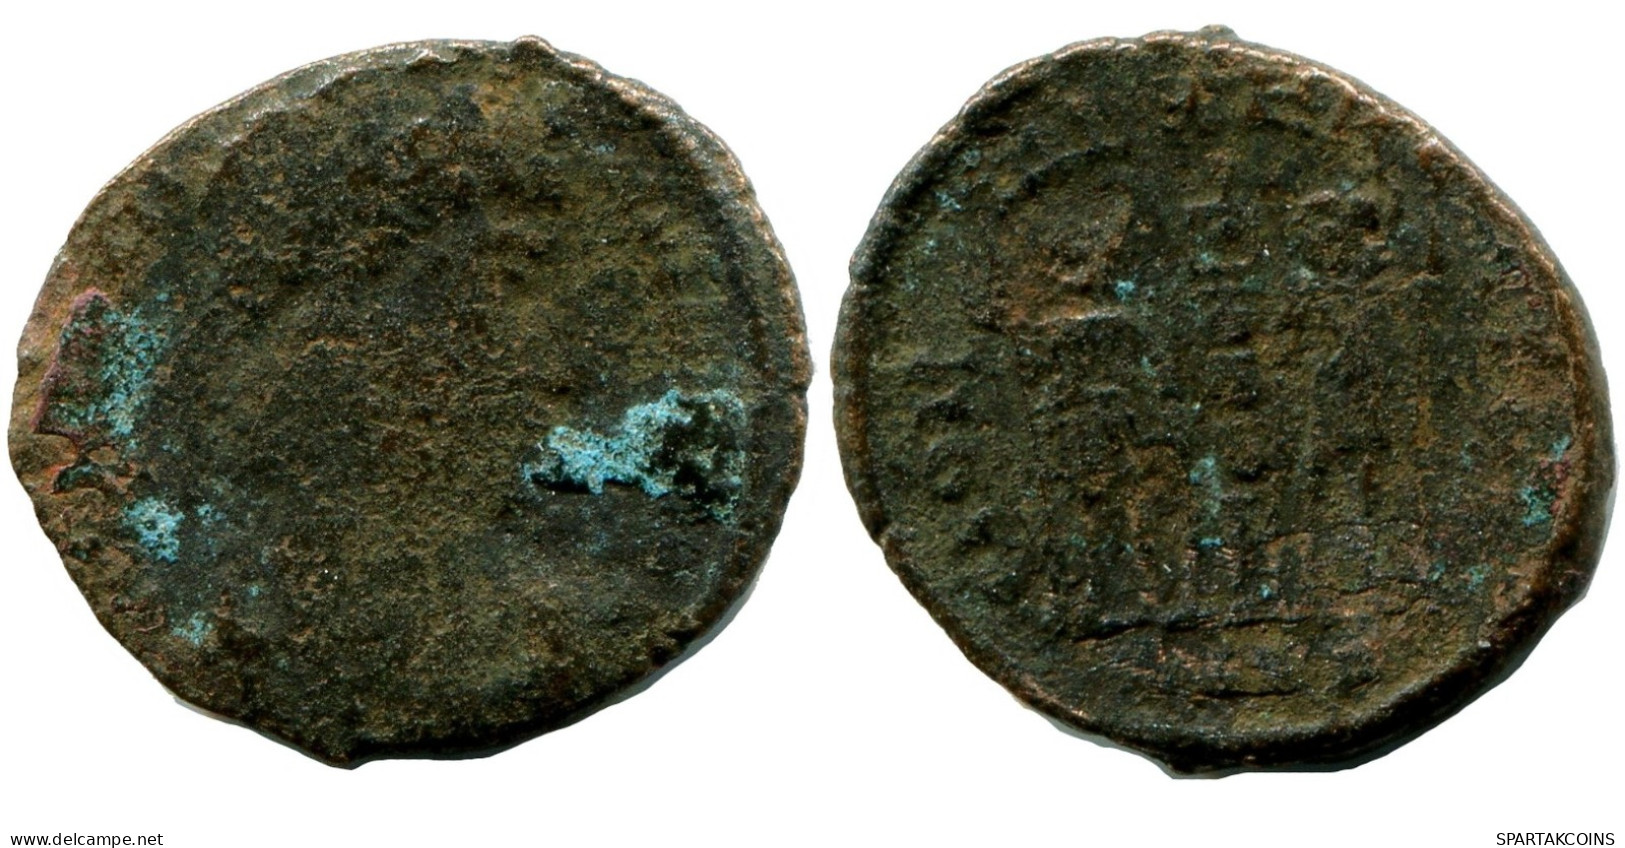 ROMAN Coin MINTED IN CYZICUS FROM THE ROYAL ONTARIO MUSEUM #ANC11042.14.D.A - L'Empire Chrétien (307 à 363)